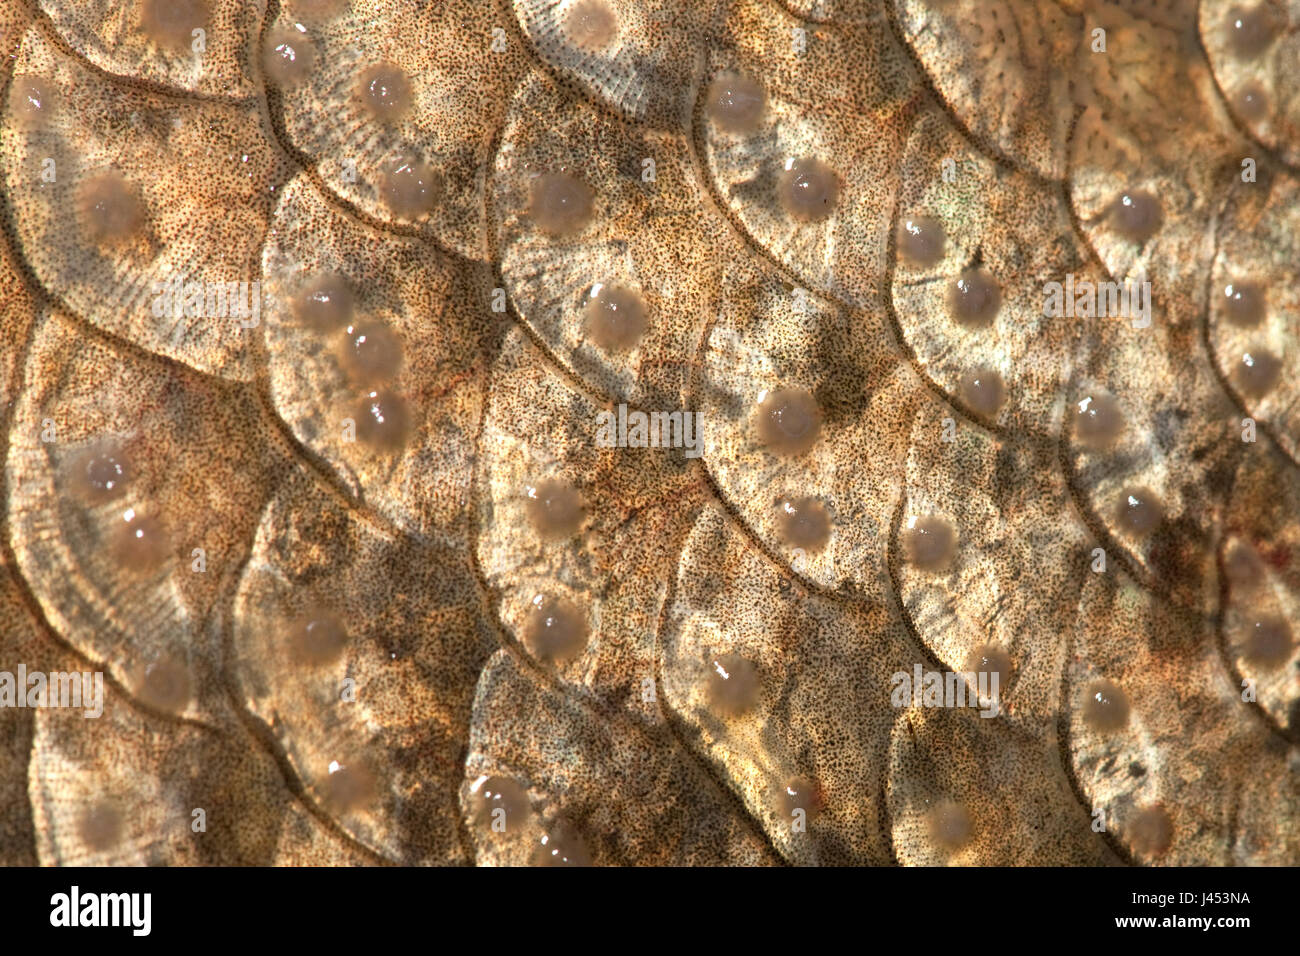 macro of the scales of a bream with spawning tubercles Stock Photo